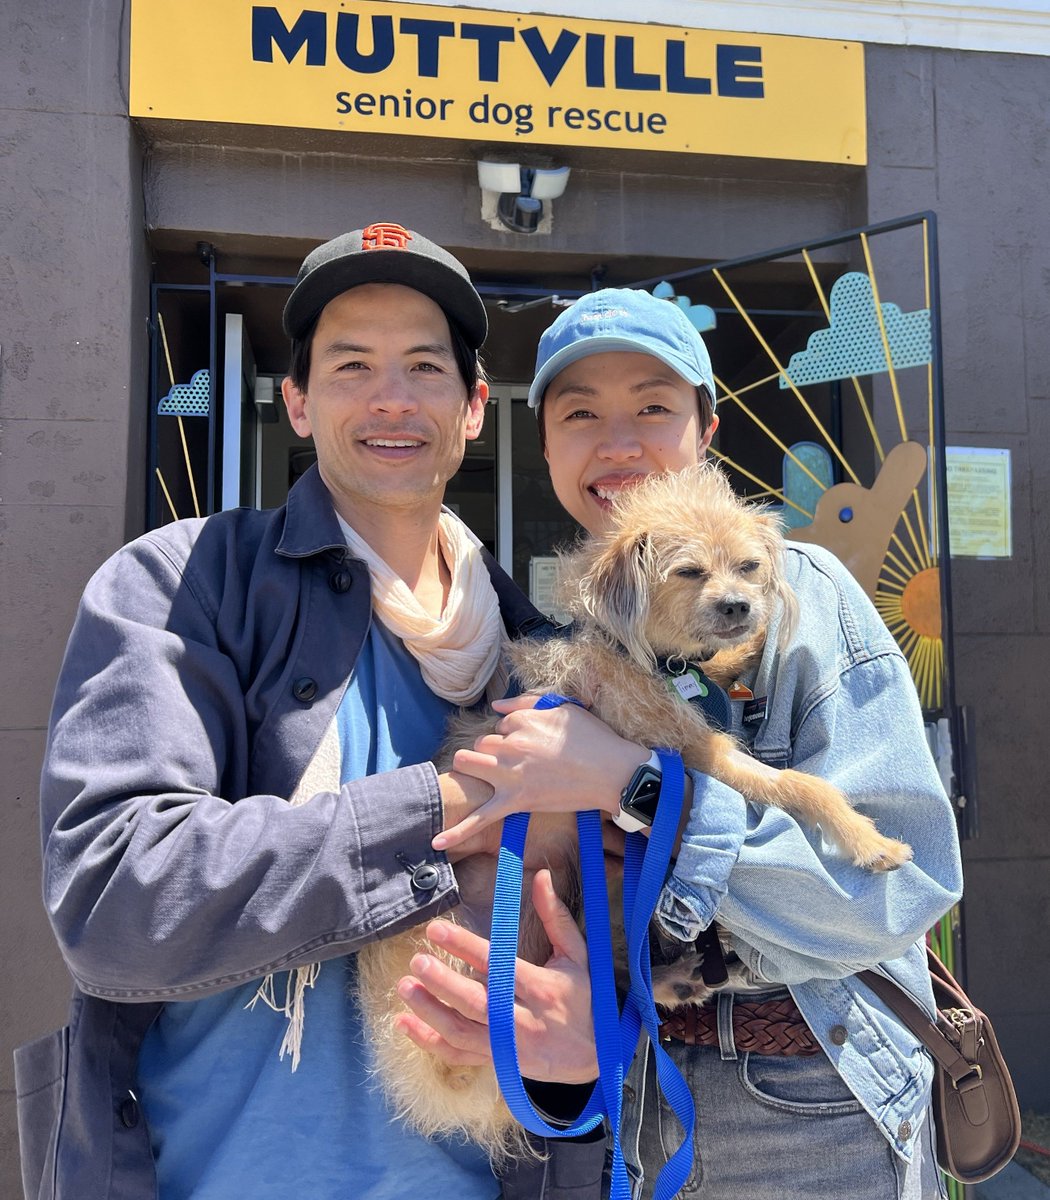 We're happy to share that Timmy was #adopted by Diana & Oyang in #SanFrancisco! They wanted 'a mild-mannered, chill dog who likes to play, walk, & cuddle.' Diana works from home, so he'll have company most of the day! Score!